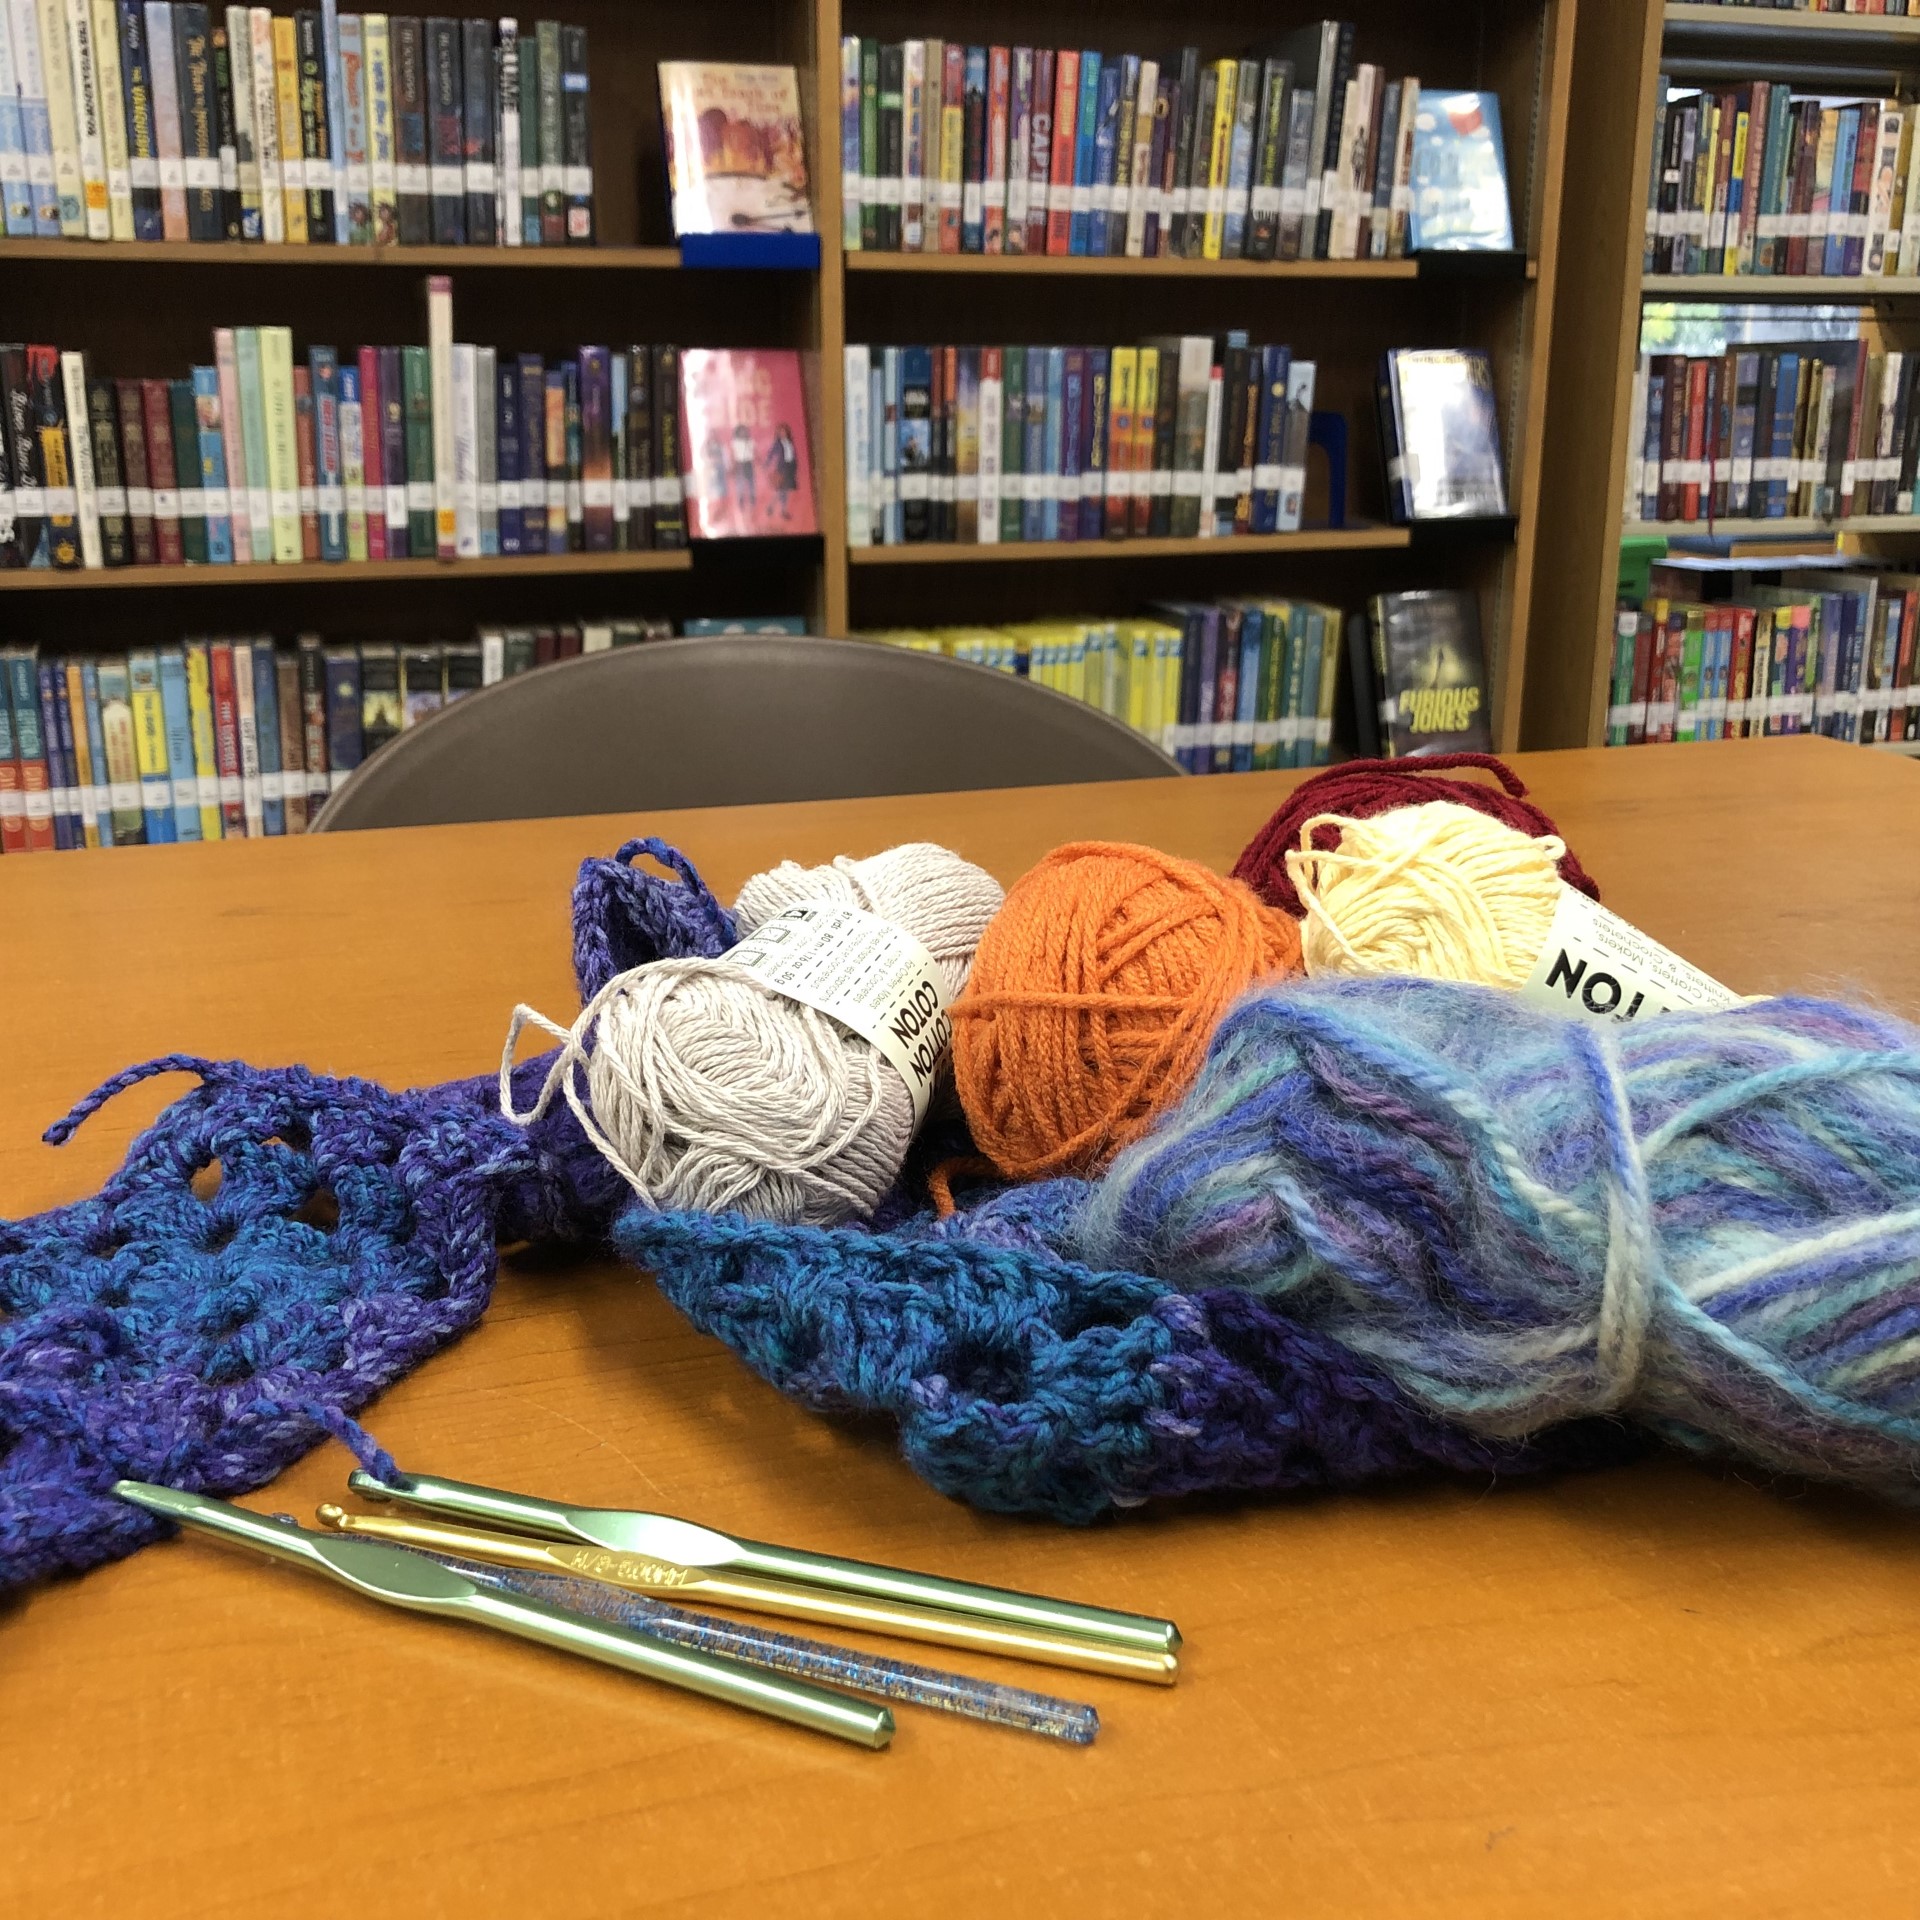 a pile of colorful yarn and some chrochet hooks on a table with a bookshelf behind it at the Kensington-Normal Heights Branch Library.